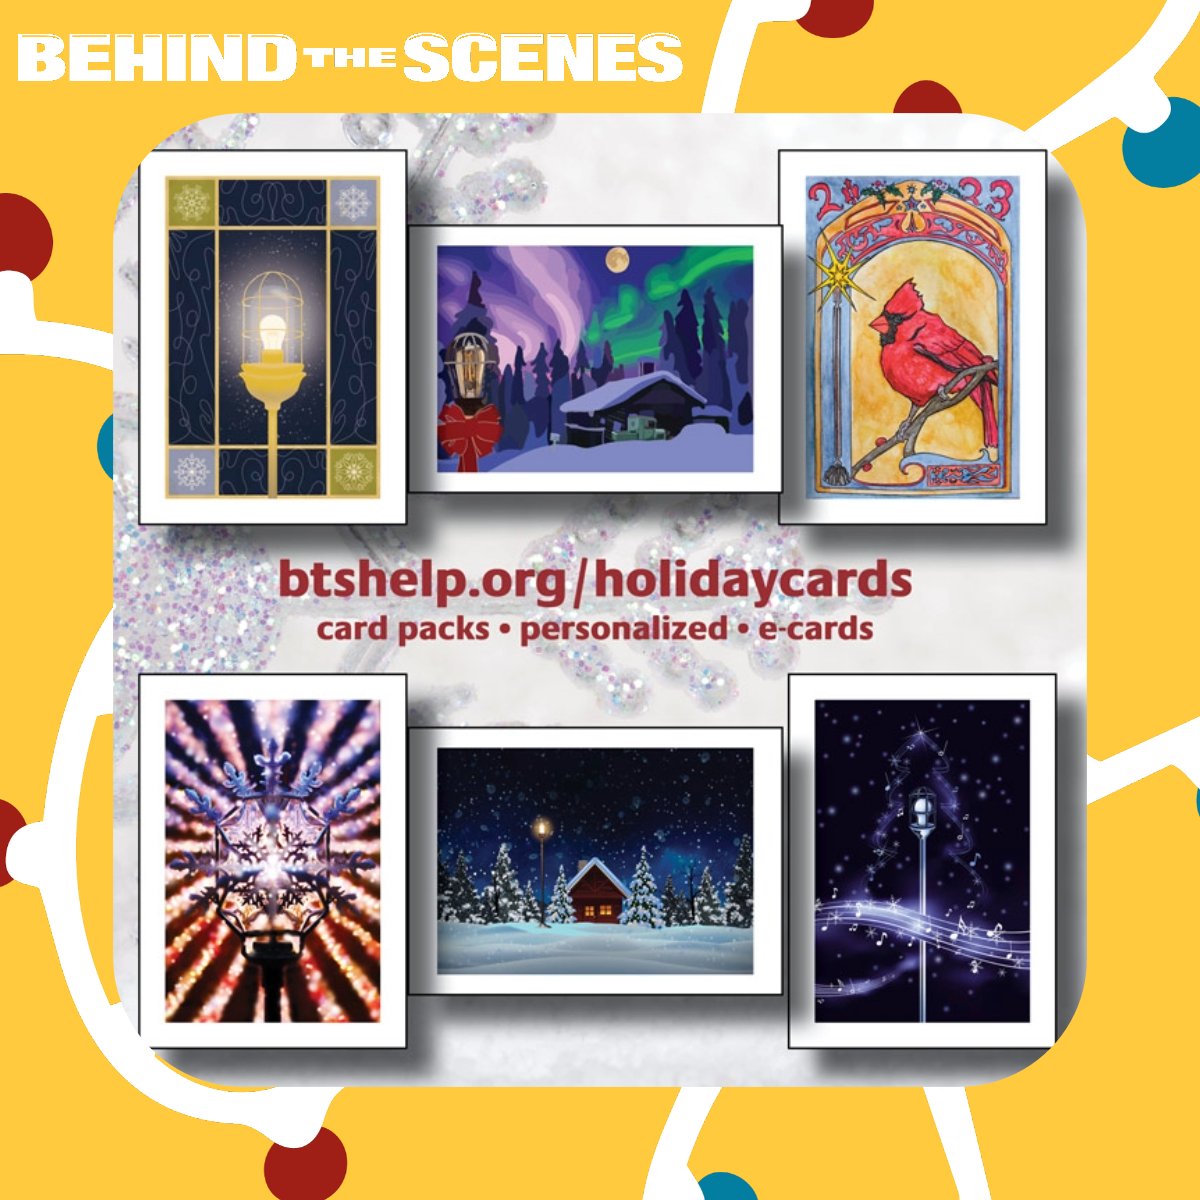 Time is running out to order this years festive designs! Check out the link in our bio and order your BTS holiday cards before the 9/26 deadline! #holidaycards #entertainmentindustry #linkinbio